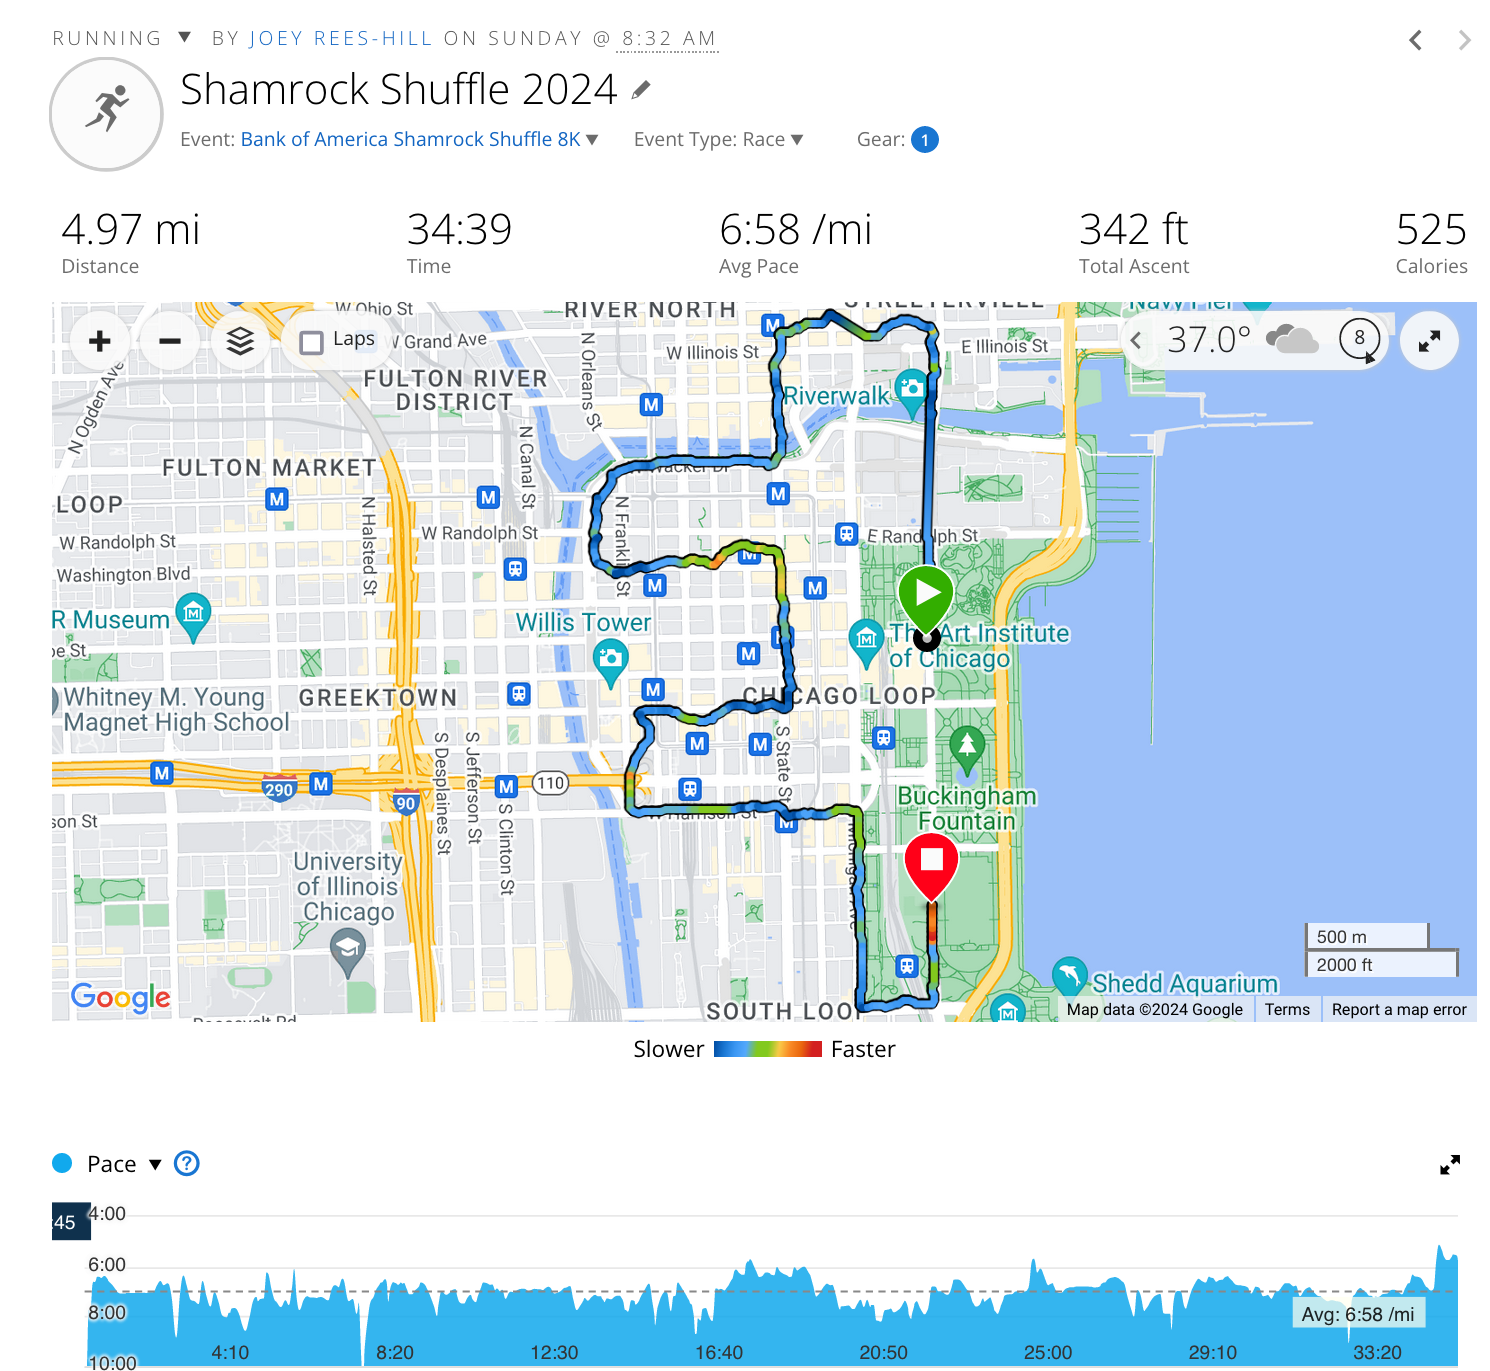 Screenshot of my race recording, which seems to show me floating into various city blocks due to poor GPS reception.